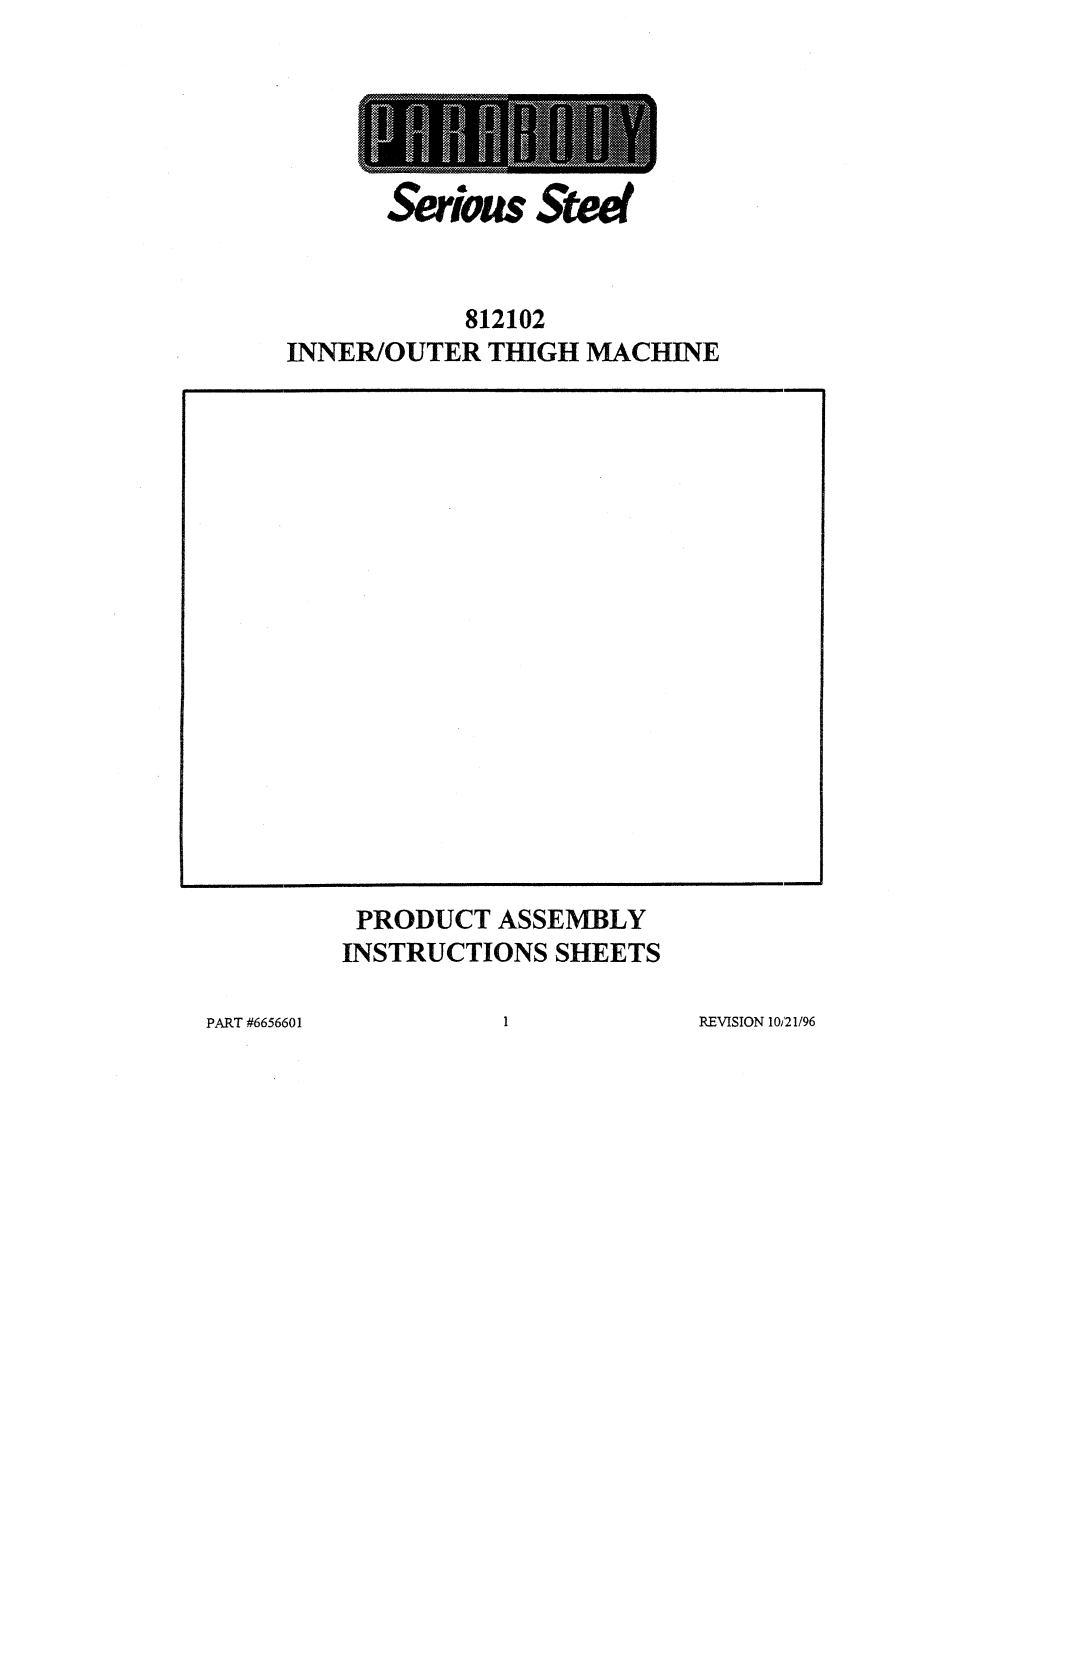 Life Fitness 812102 manual SeriousSteel, Inner/Outer Thigh Machine Product Assembly Instructions Sheets, PART #6656601 